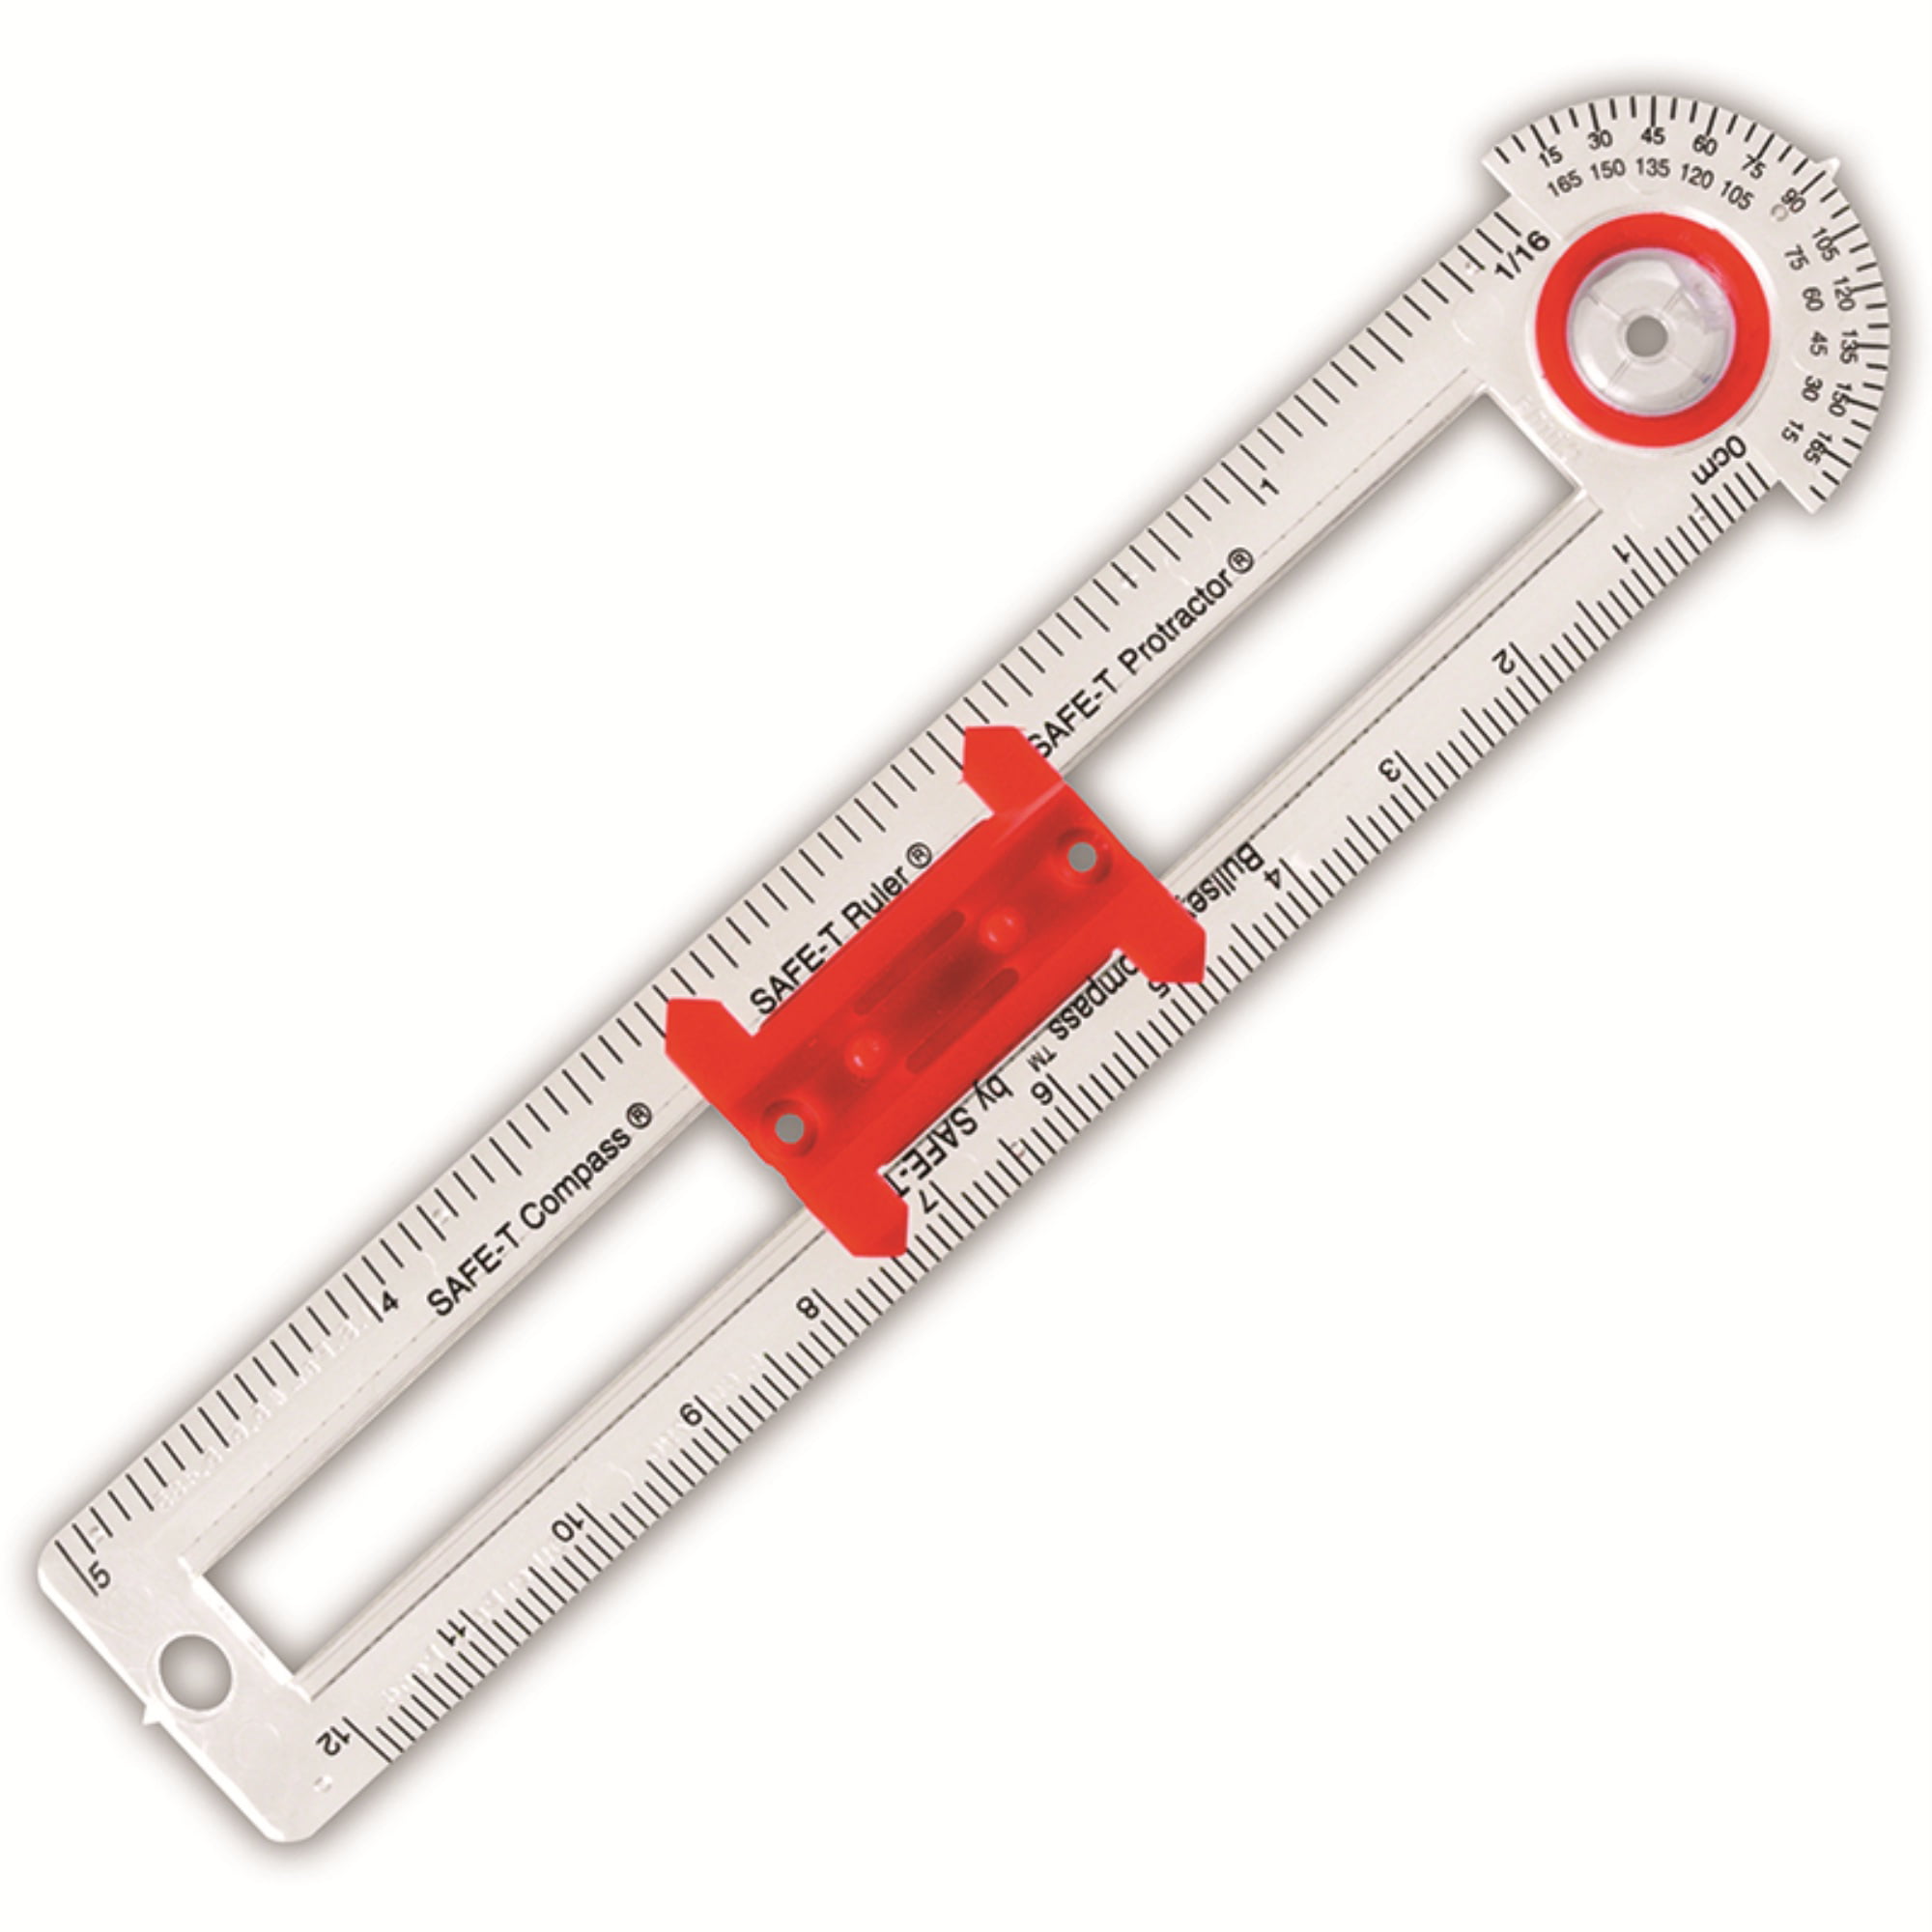 Black/Red Plastic School Smart Rounded Tip Safety Compass with Pencil 